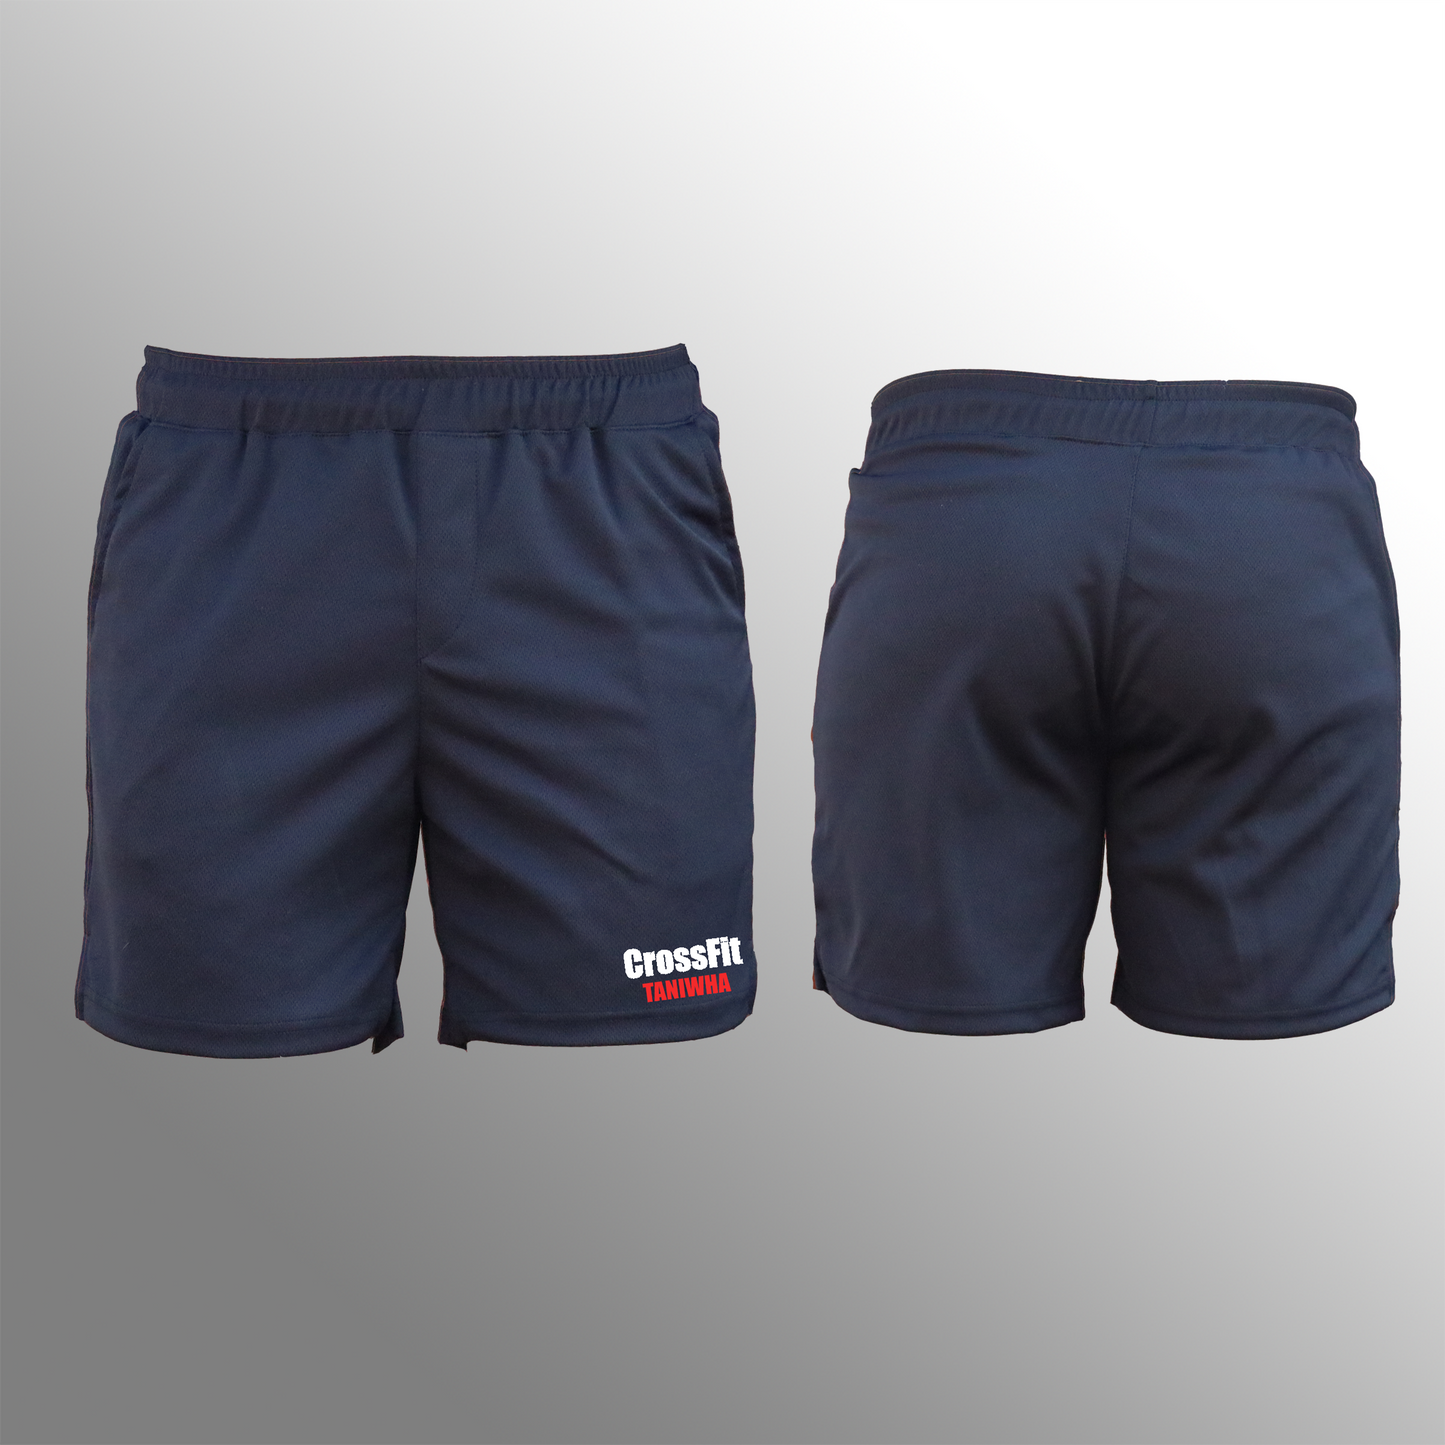 CrossFit Taniwha - Coaches - Shorts